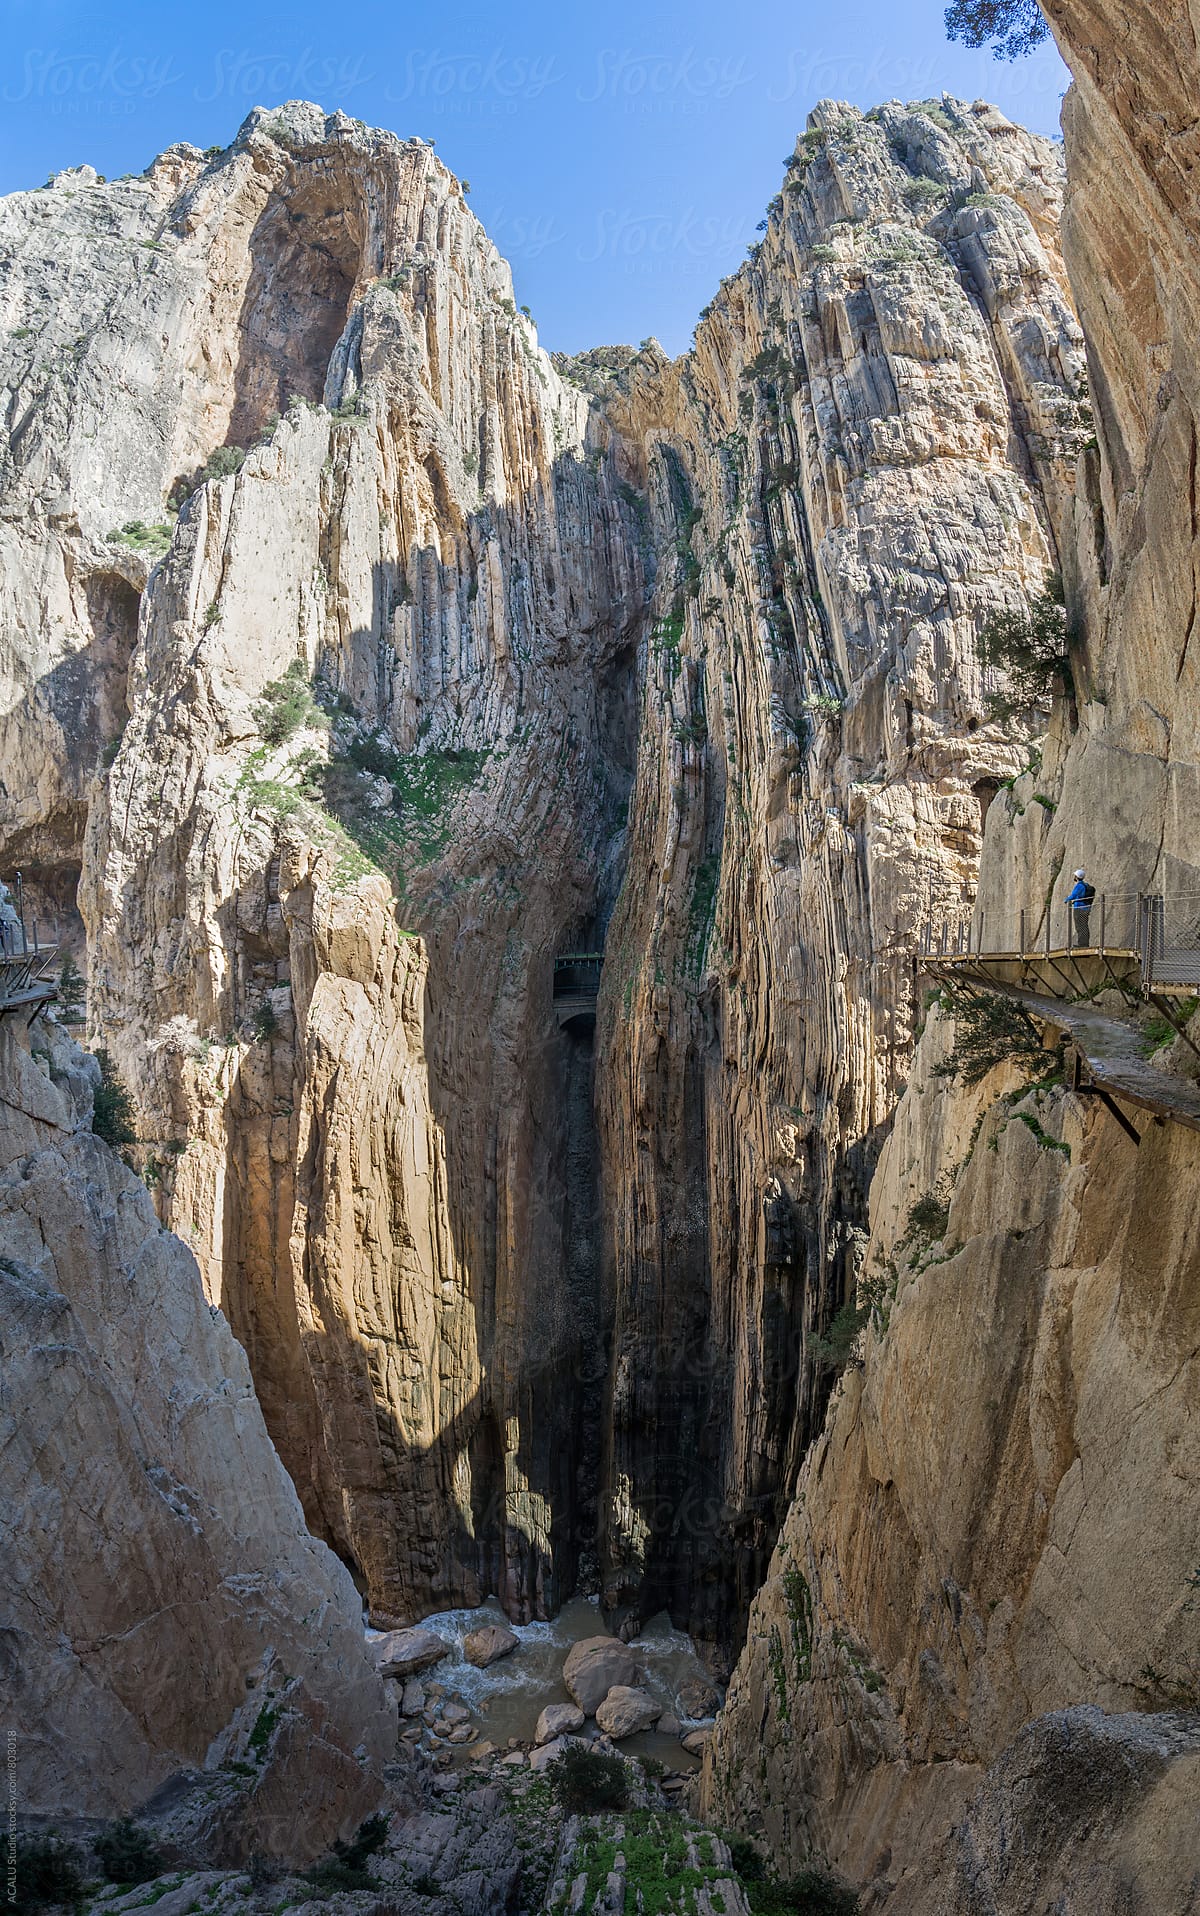 Climber looking at the edge of a cliff in Caminito del Rey